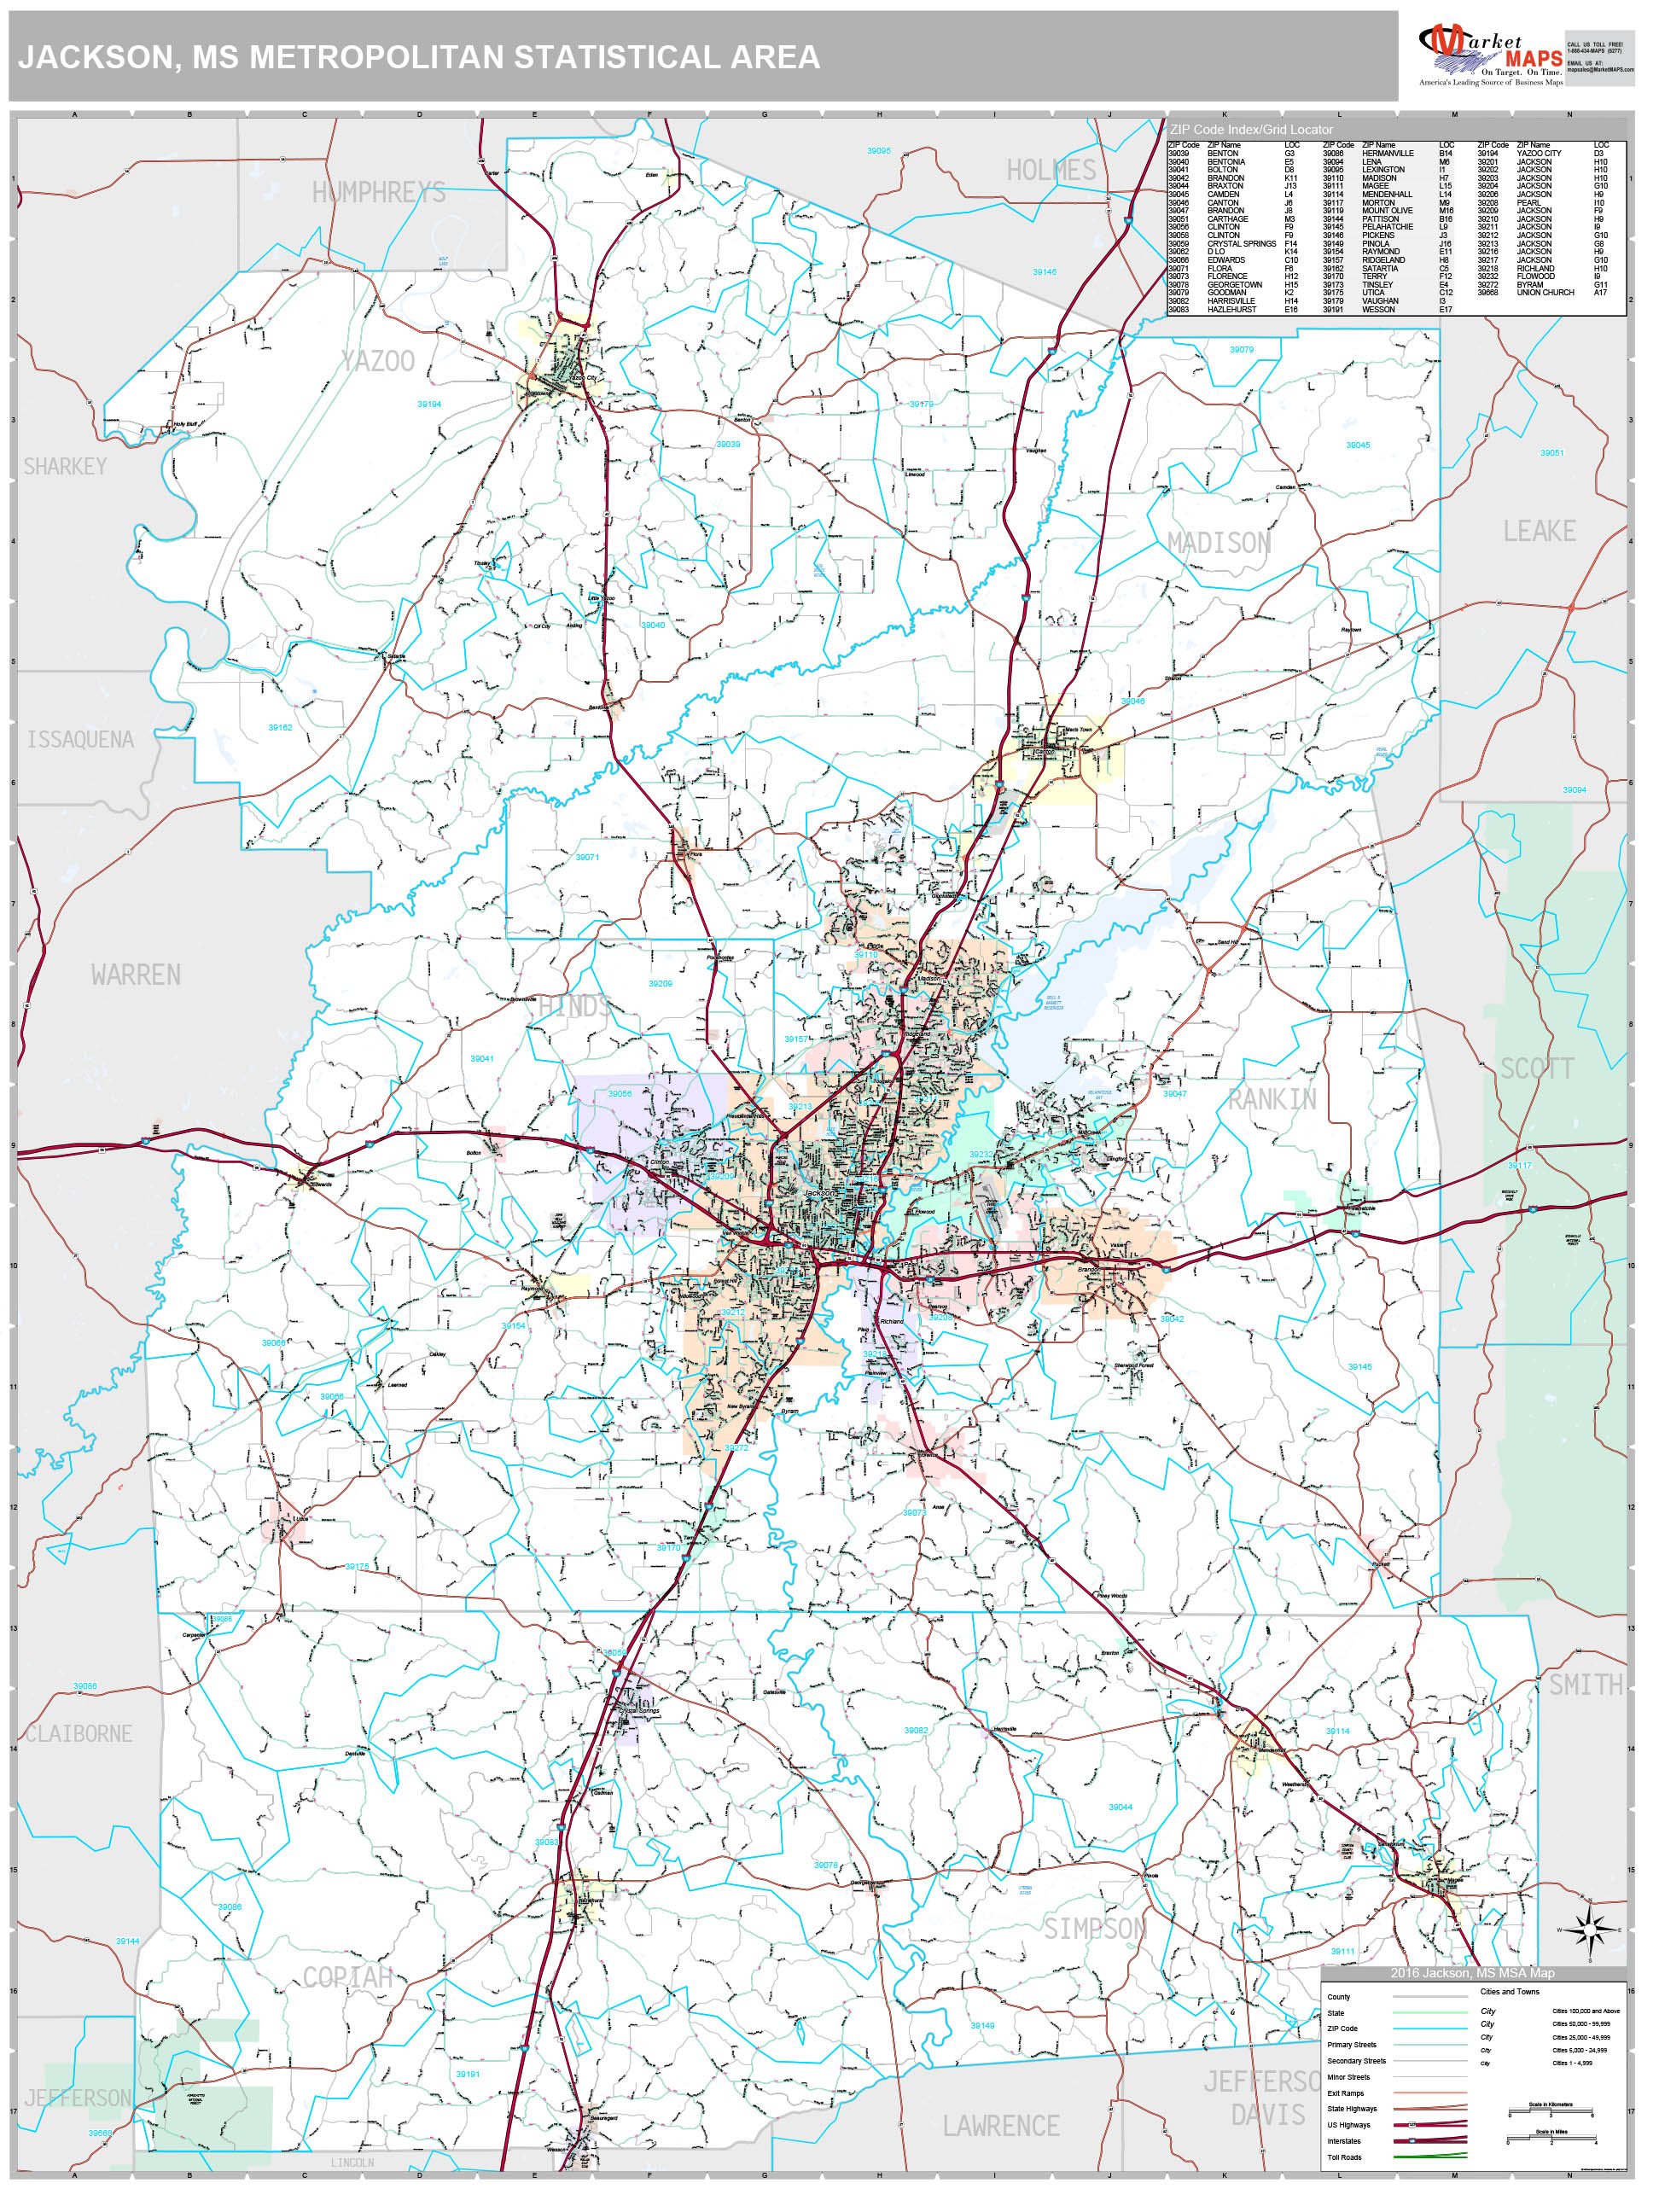 Jackson Ms Metro Area Wall Map Basic Style By Marketmaps Images and